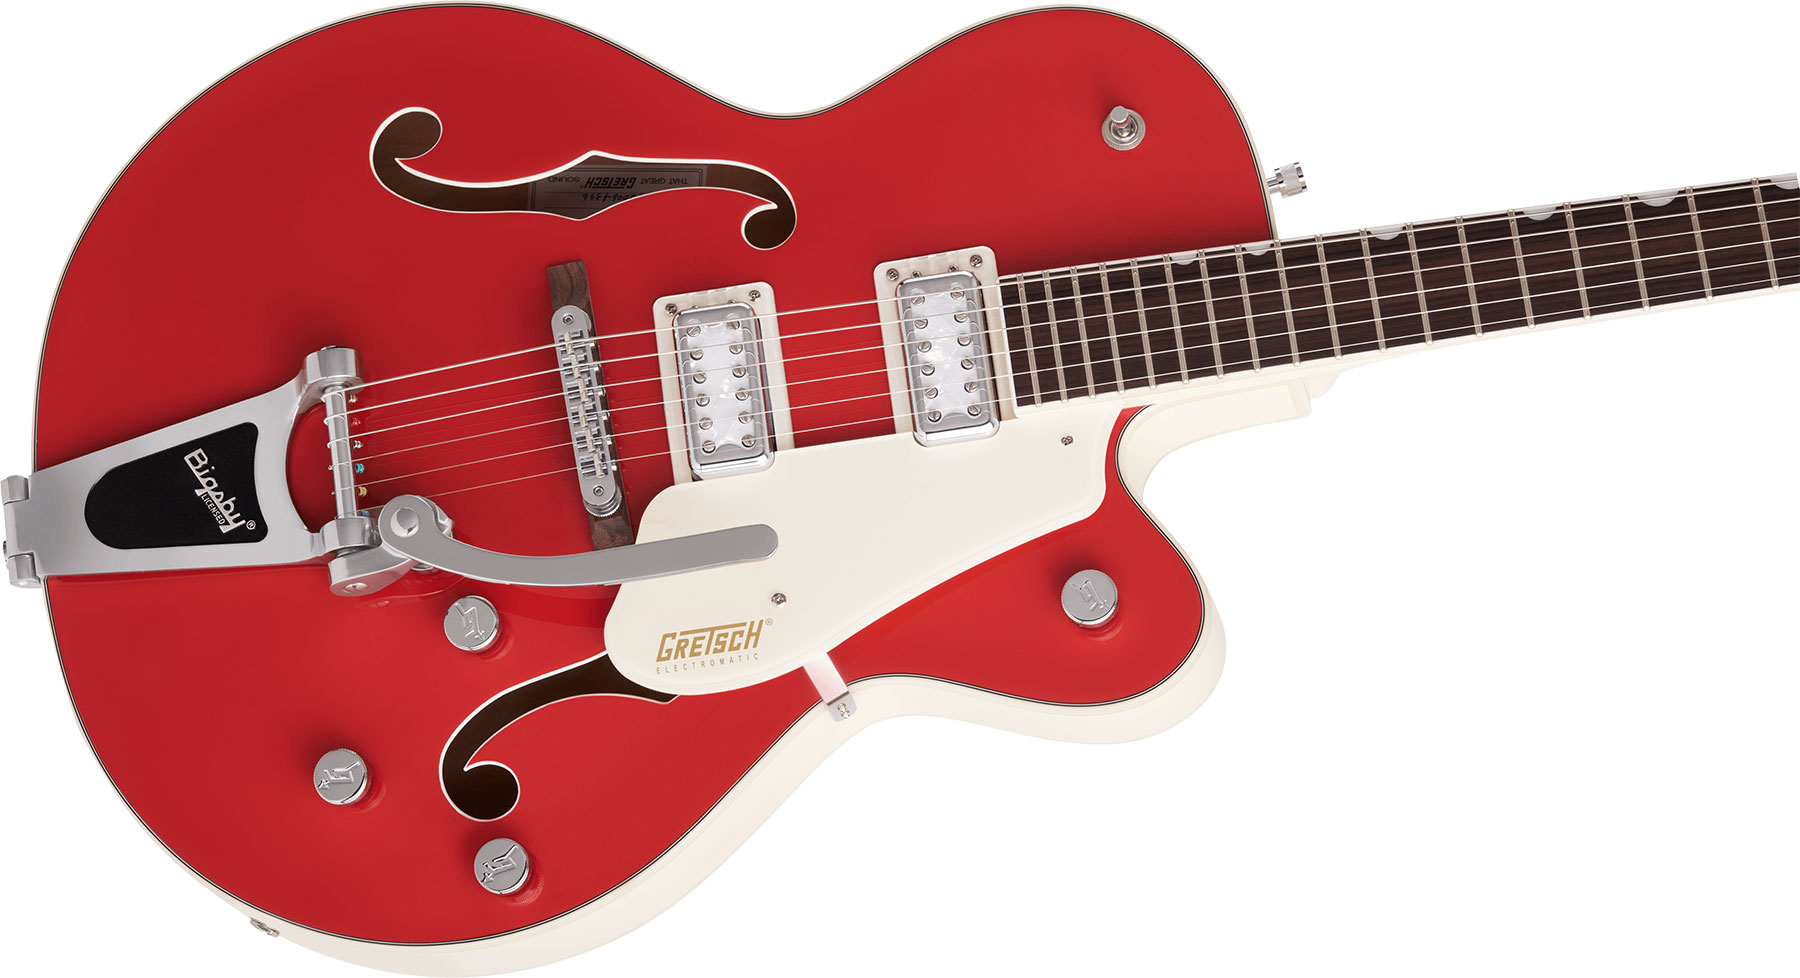 Gretsch G5410t Tri-five Electromatic Hollow Hh Bigsby Rw - 2-tone Fiesta Red On Vintage White - Semi-hollow electric guitar - Variation 2